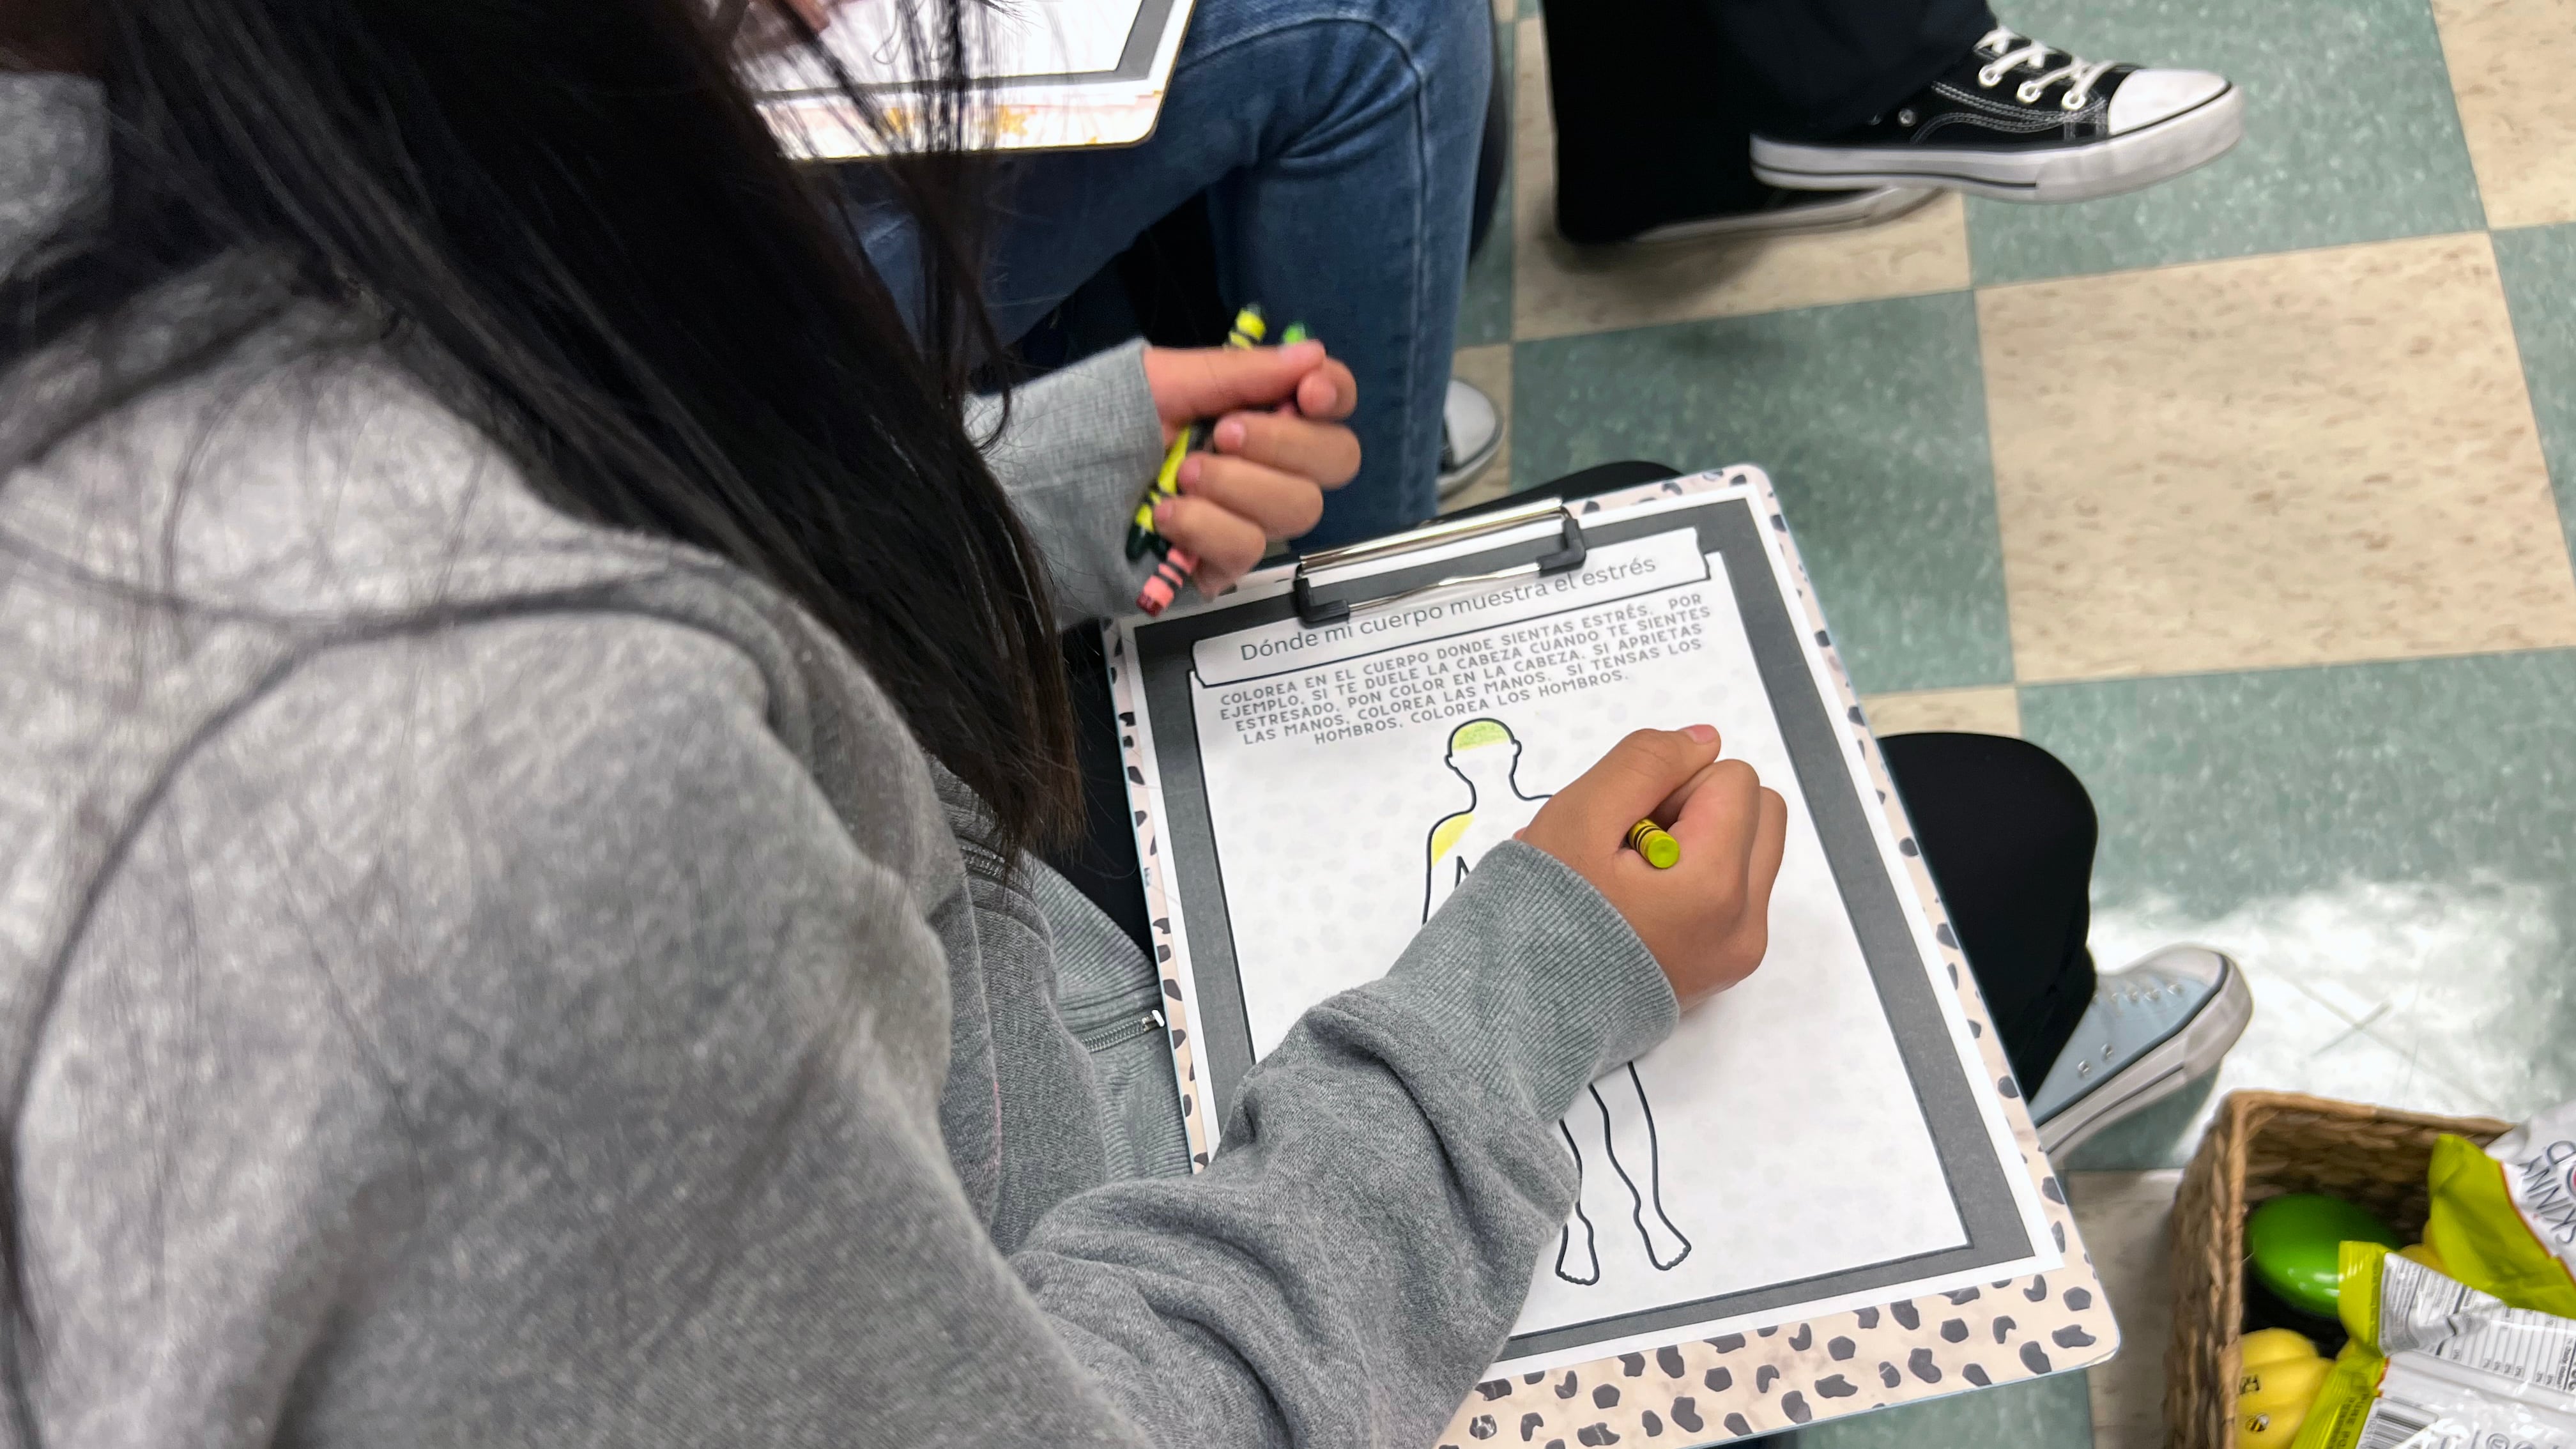 A student at Brighton Park Elementary School uses a crayon to color inside an outline of the human body.